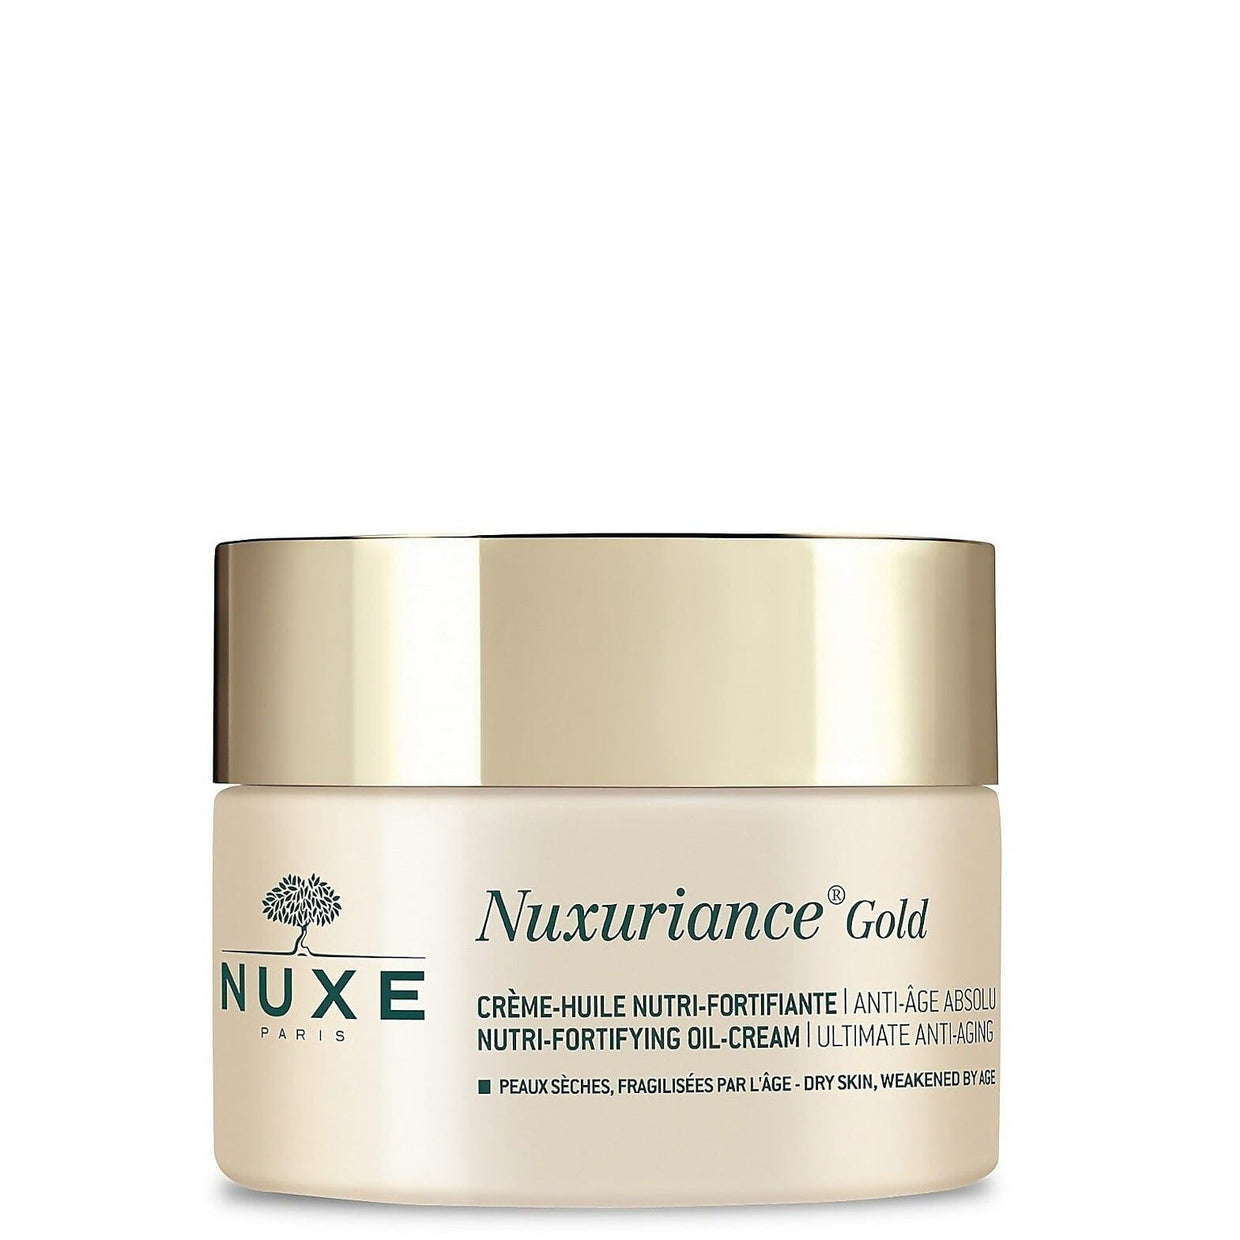 Nuxe Nuxuriance Gold Nutri-Replenishing Oil Cream Nuxe 50 ml Shop at Exclusive Beauty Club